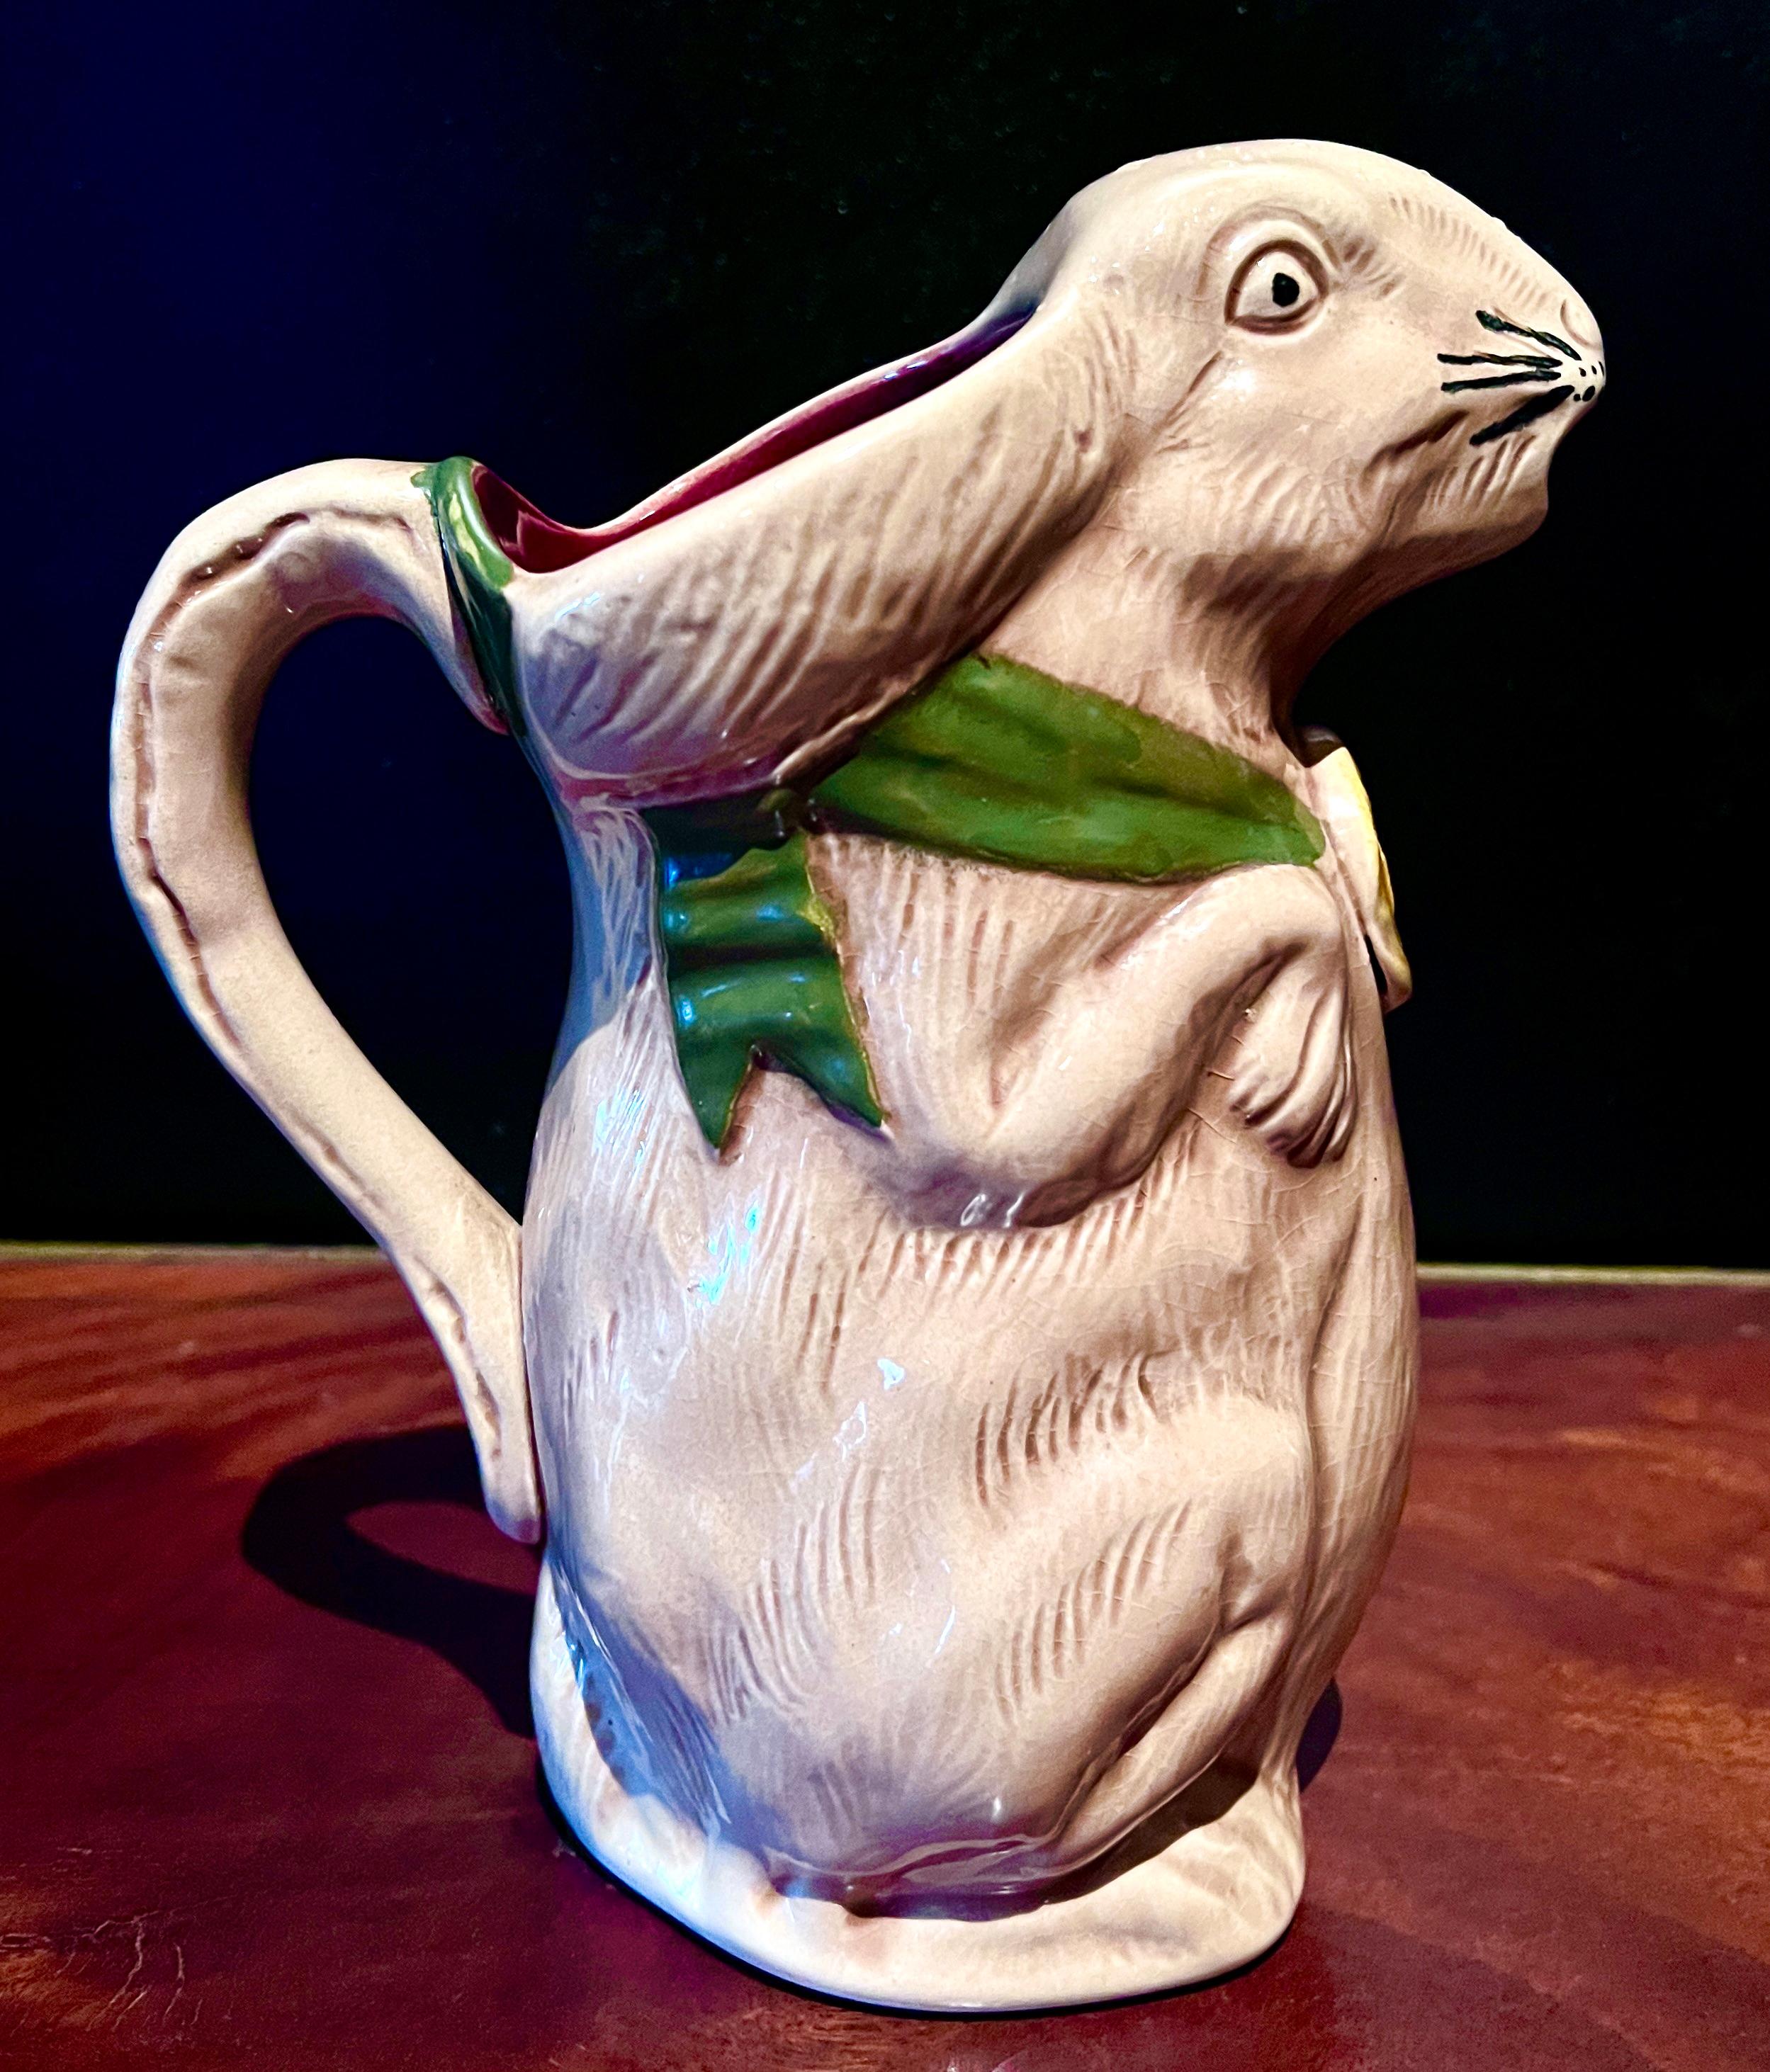 A Rare and highly collectable French glazed ceramic pitcher in the shape of a Rabbit.  The design is a wonderfully detailed rabbit wearing a green ribbon bearing a '1900' medallion, which is the year the Rabbit was made and sold at the International